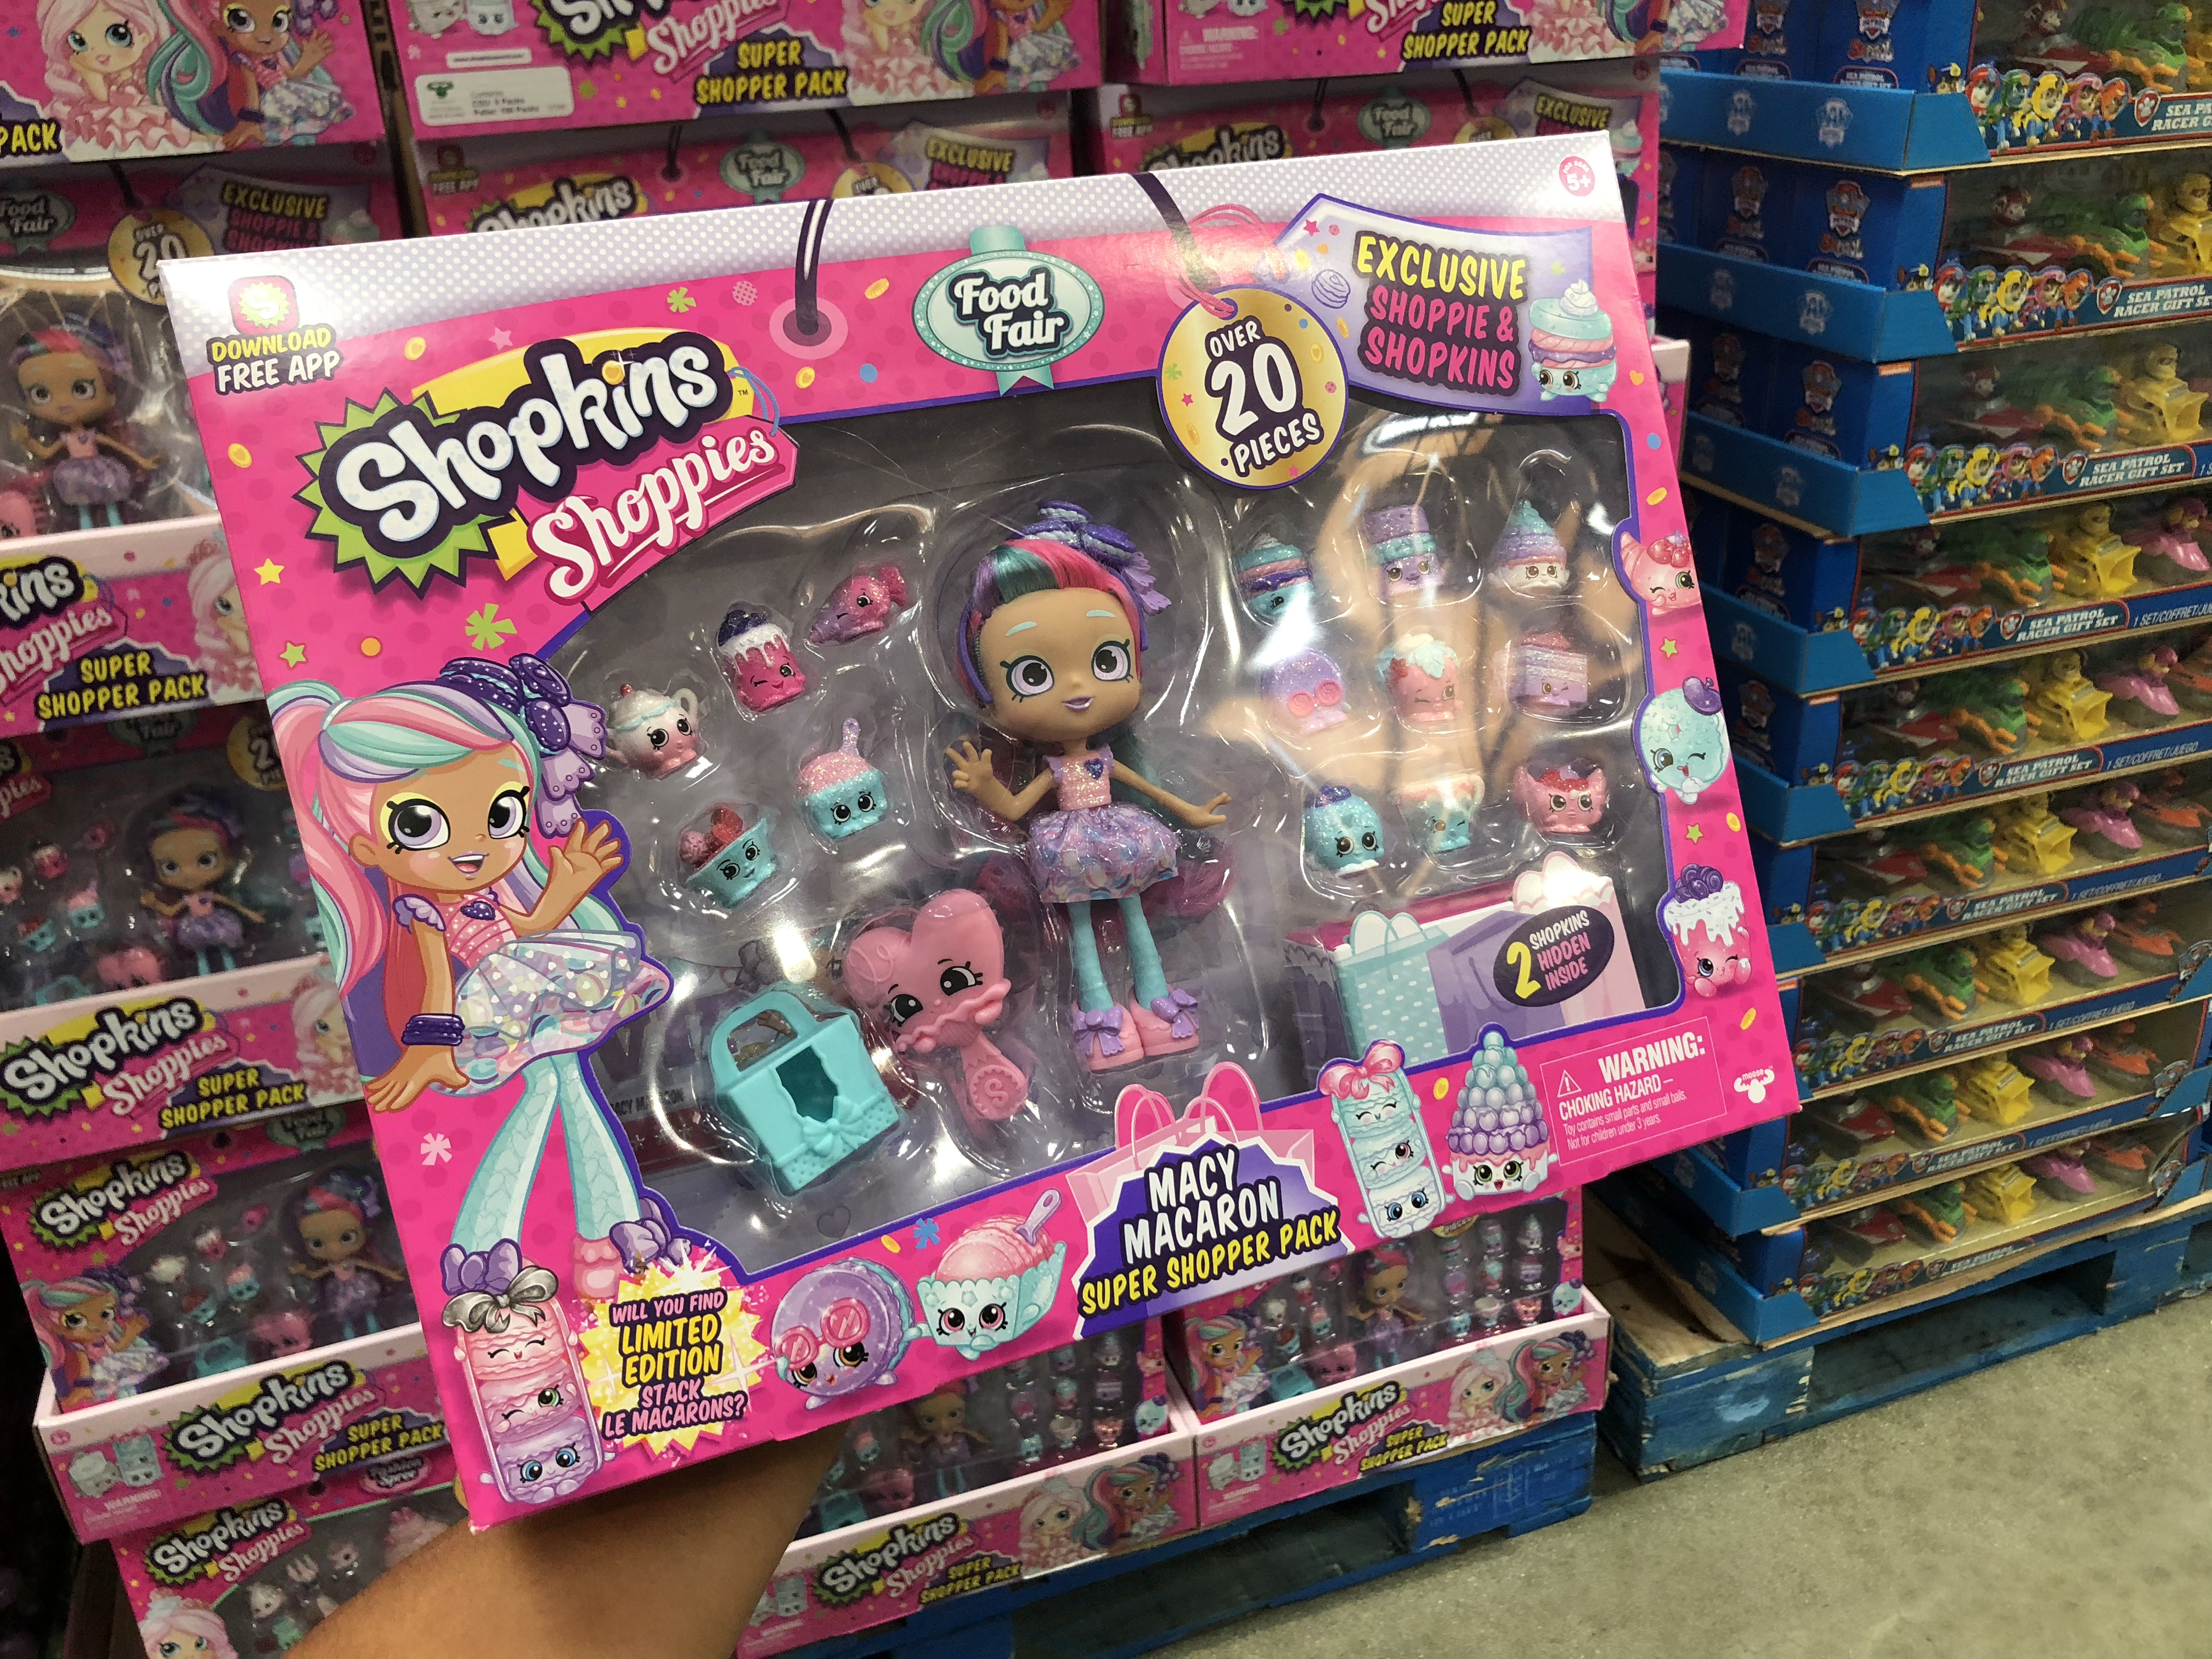 The best holiday toy deals for 2018 include Shopkins Shoppies at Costco